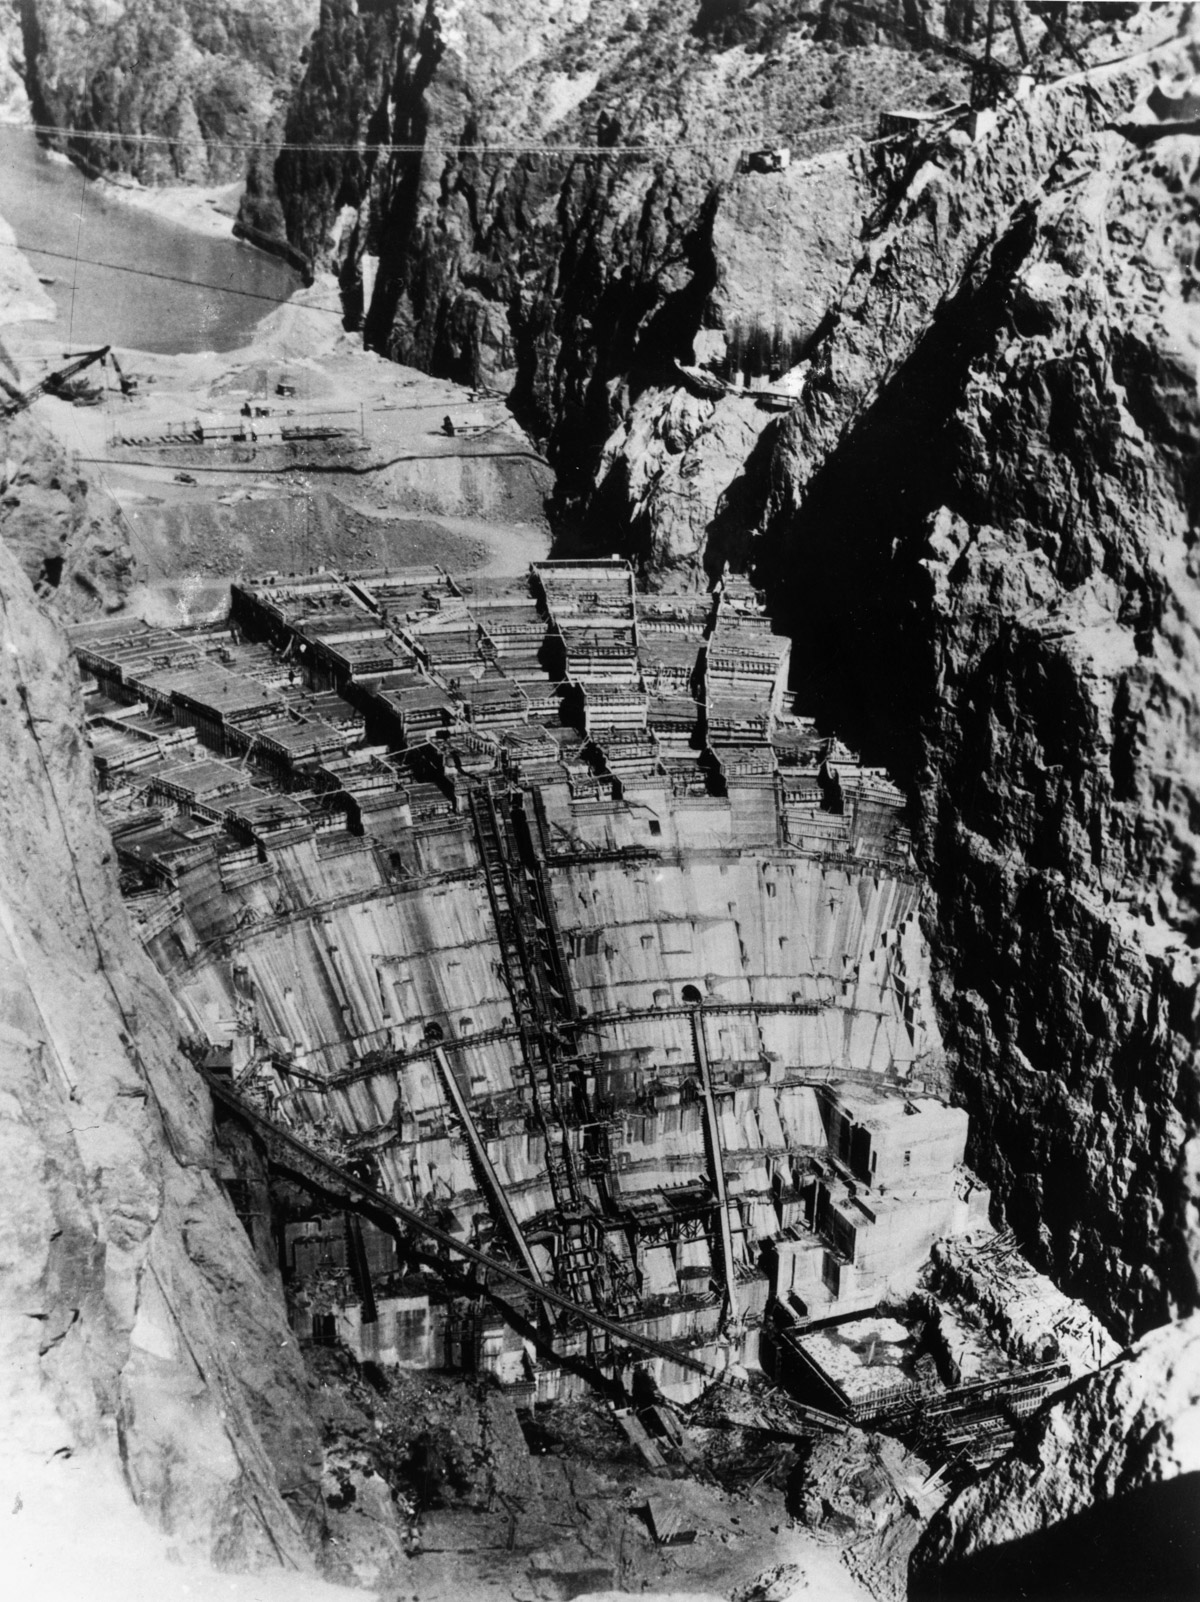 circa 1936: The Boulder Dam on the Colorado River under construction. A cable railway runs over it. (Photo by General Photographic Agency/Getty Images)